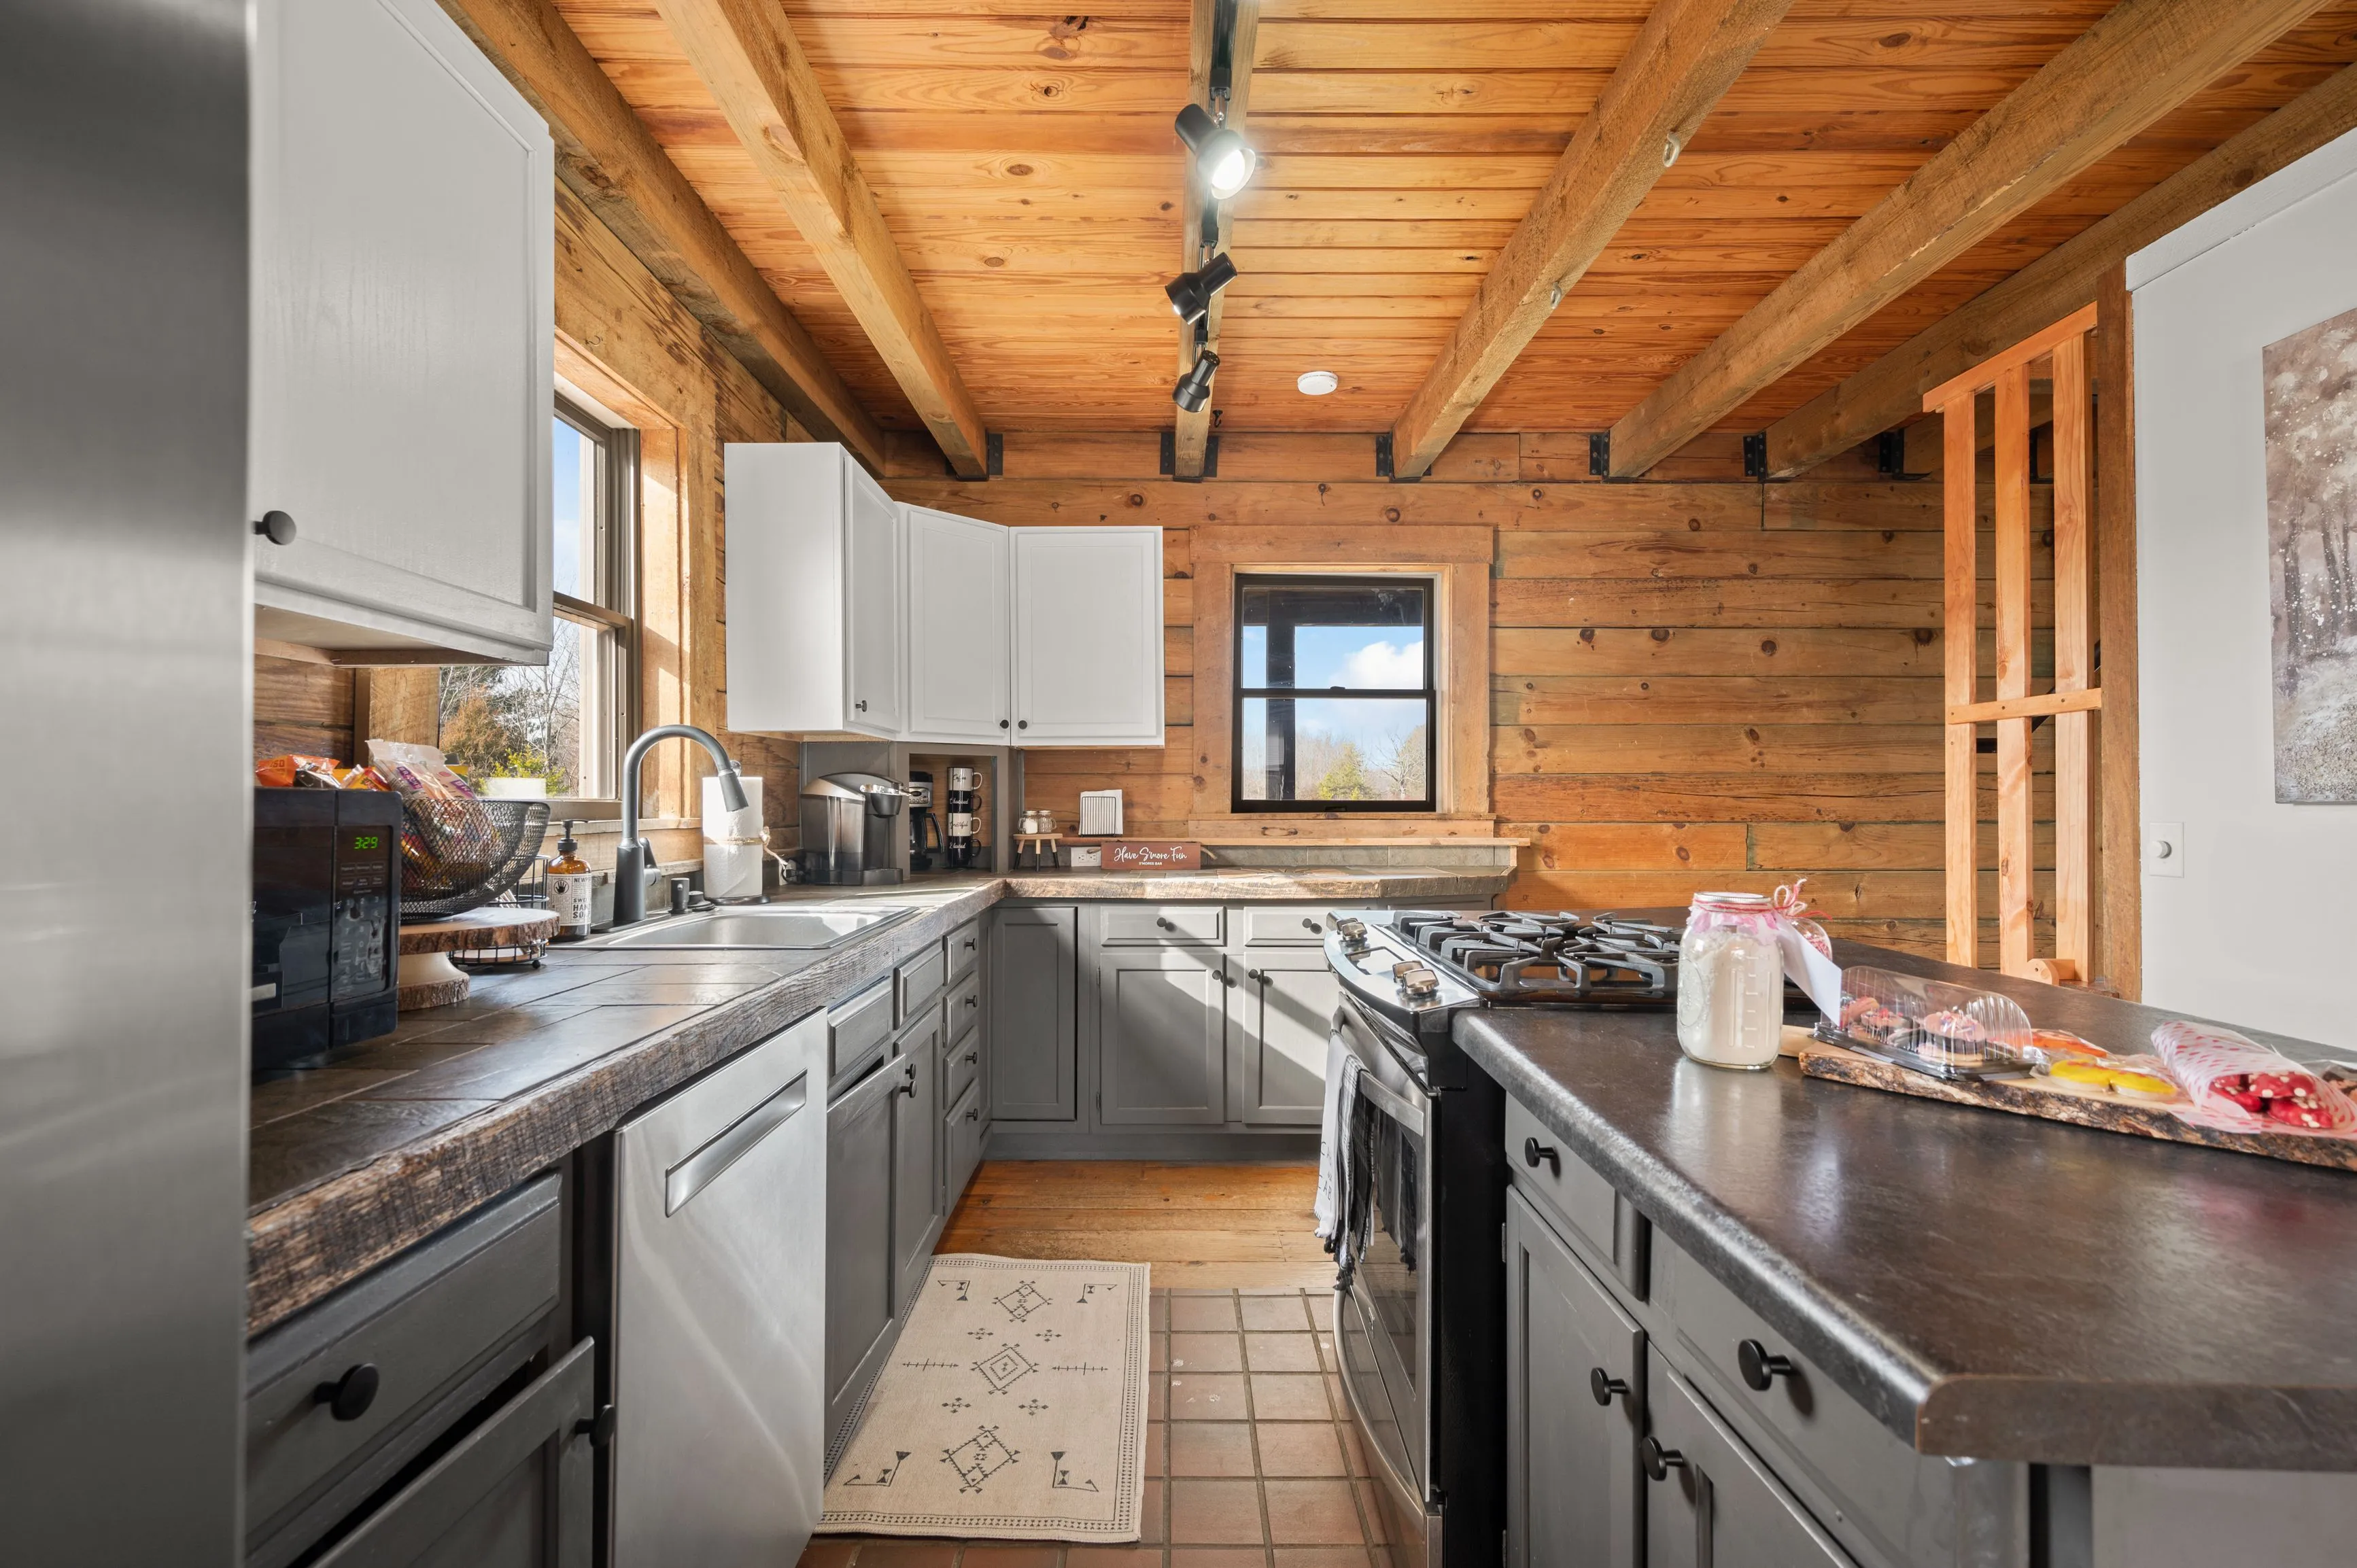 Rustic kitchen interior with wooden beams, log walls, white cabinets, stainless steel appliances, and black countertops illuminated by natural sunlight.